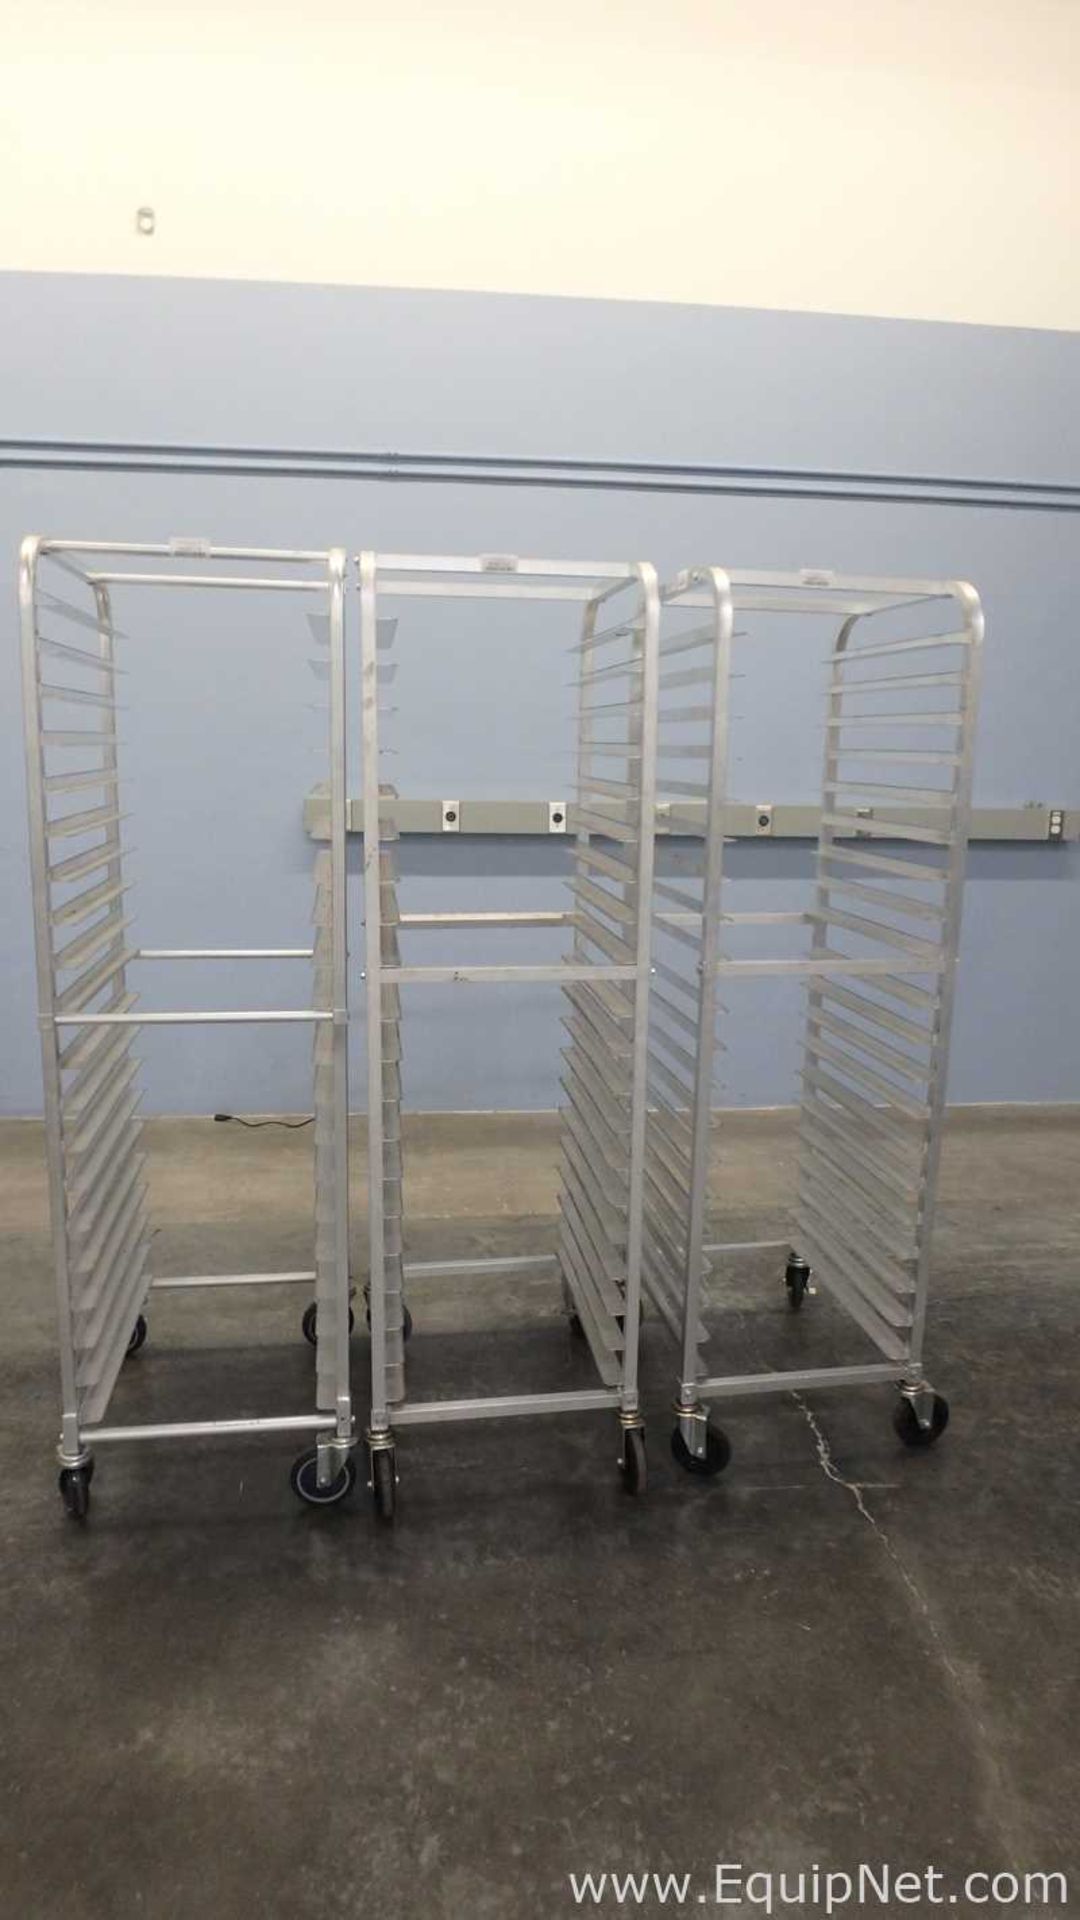 Lot of 3 Allstrong Mobile Pan Rack Full Height Open Sides with Slides for 20 18inx26in Pans - Image 8 of 8